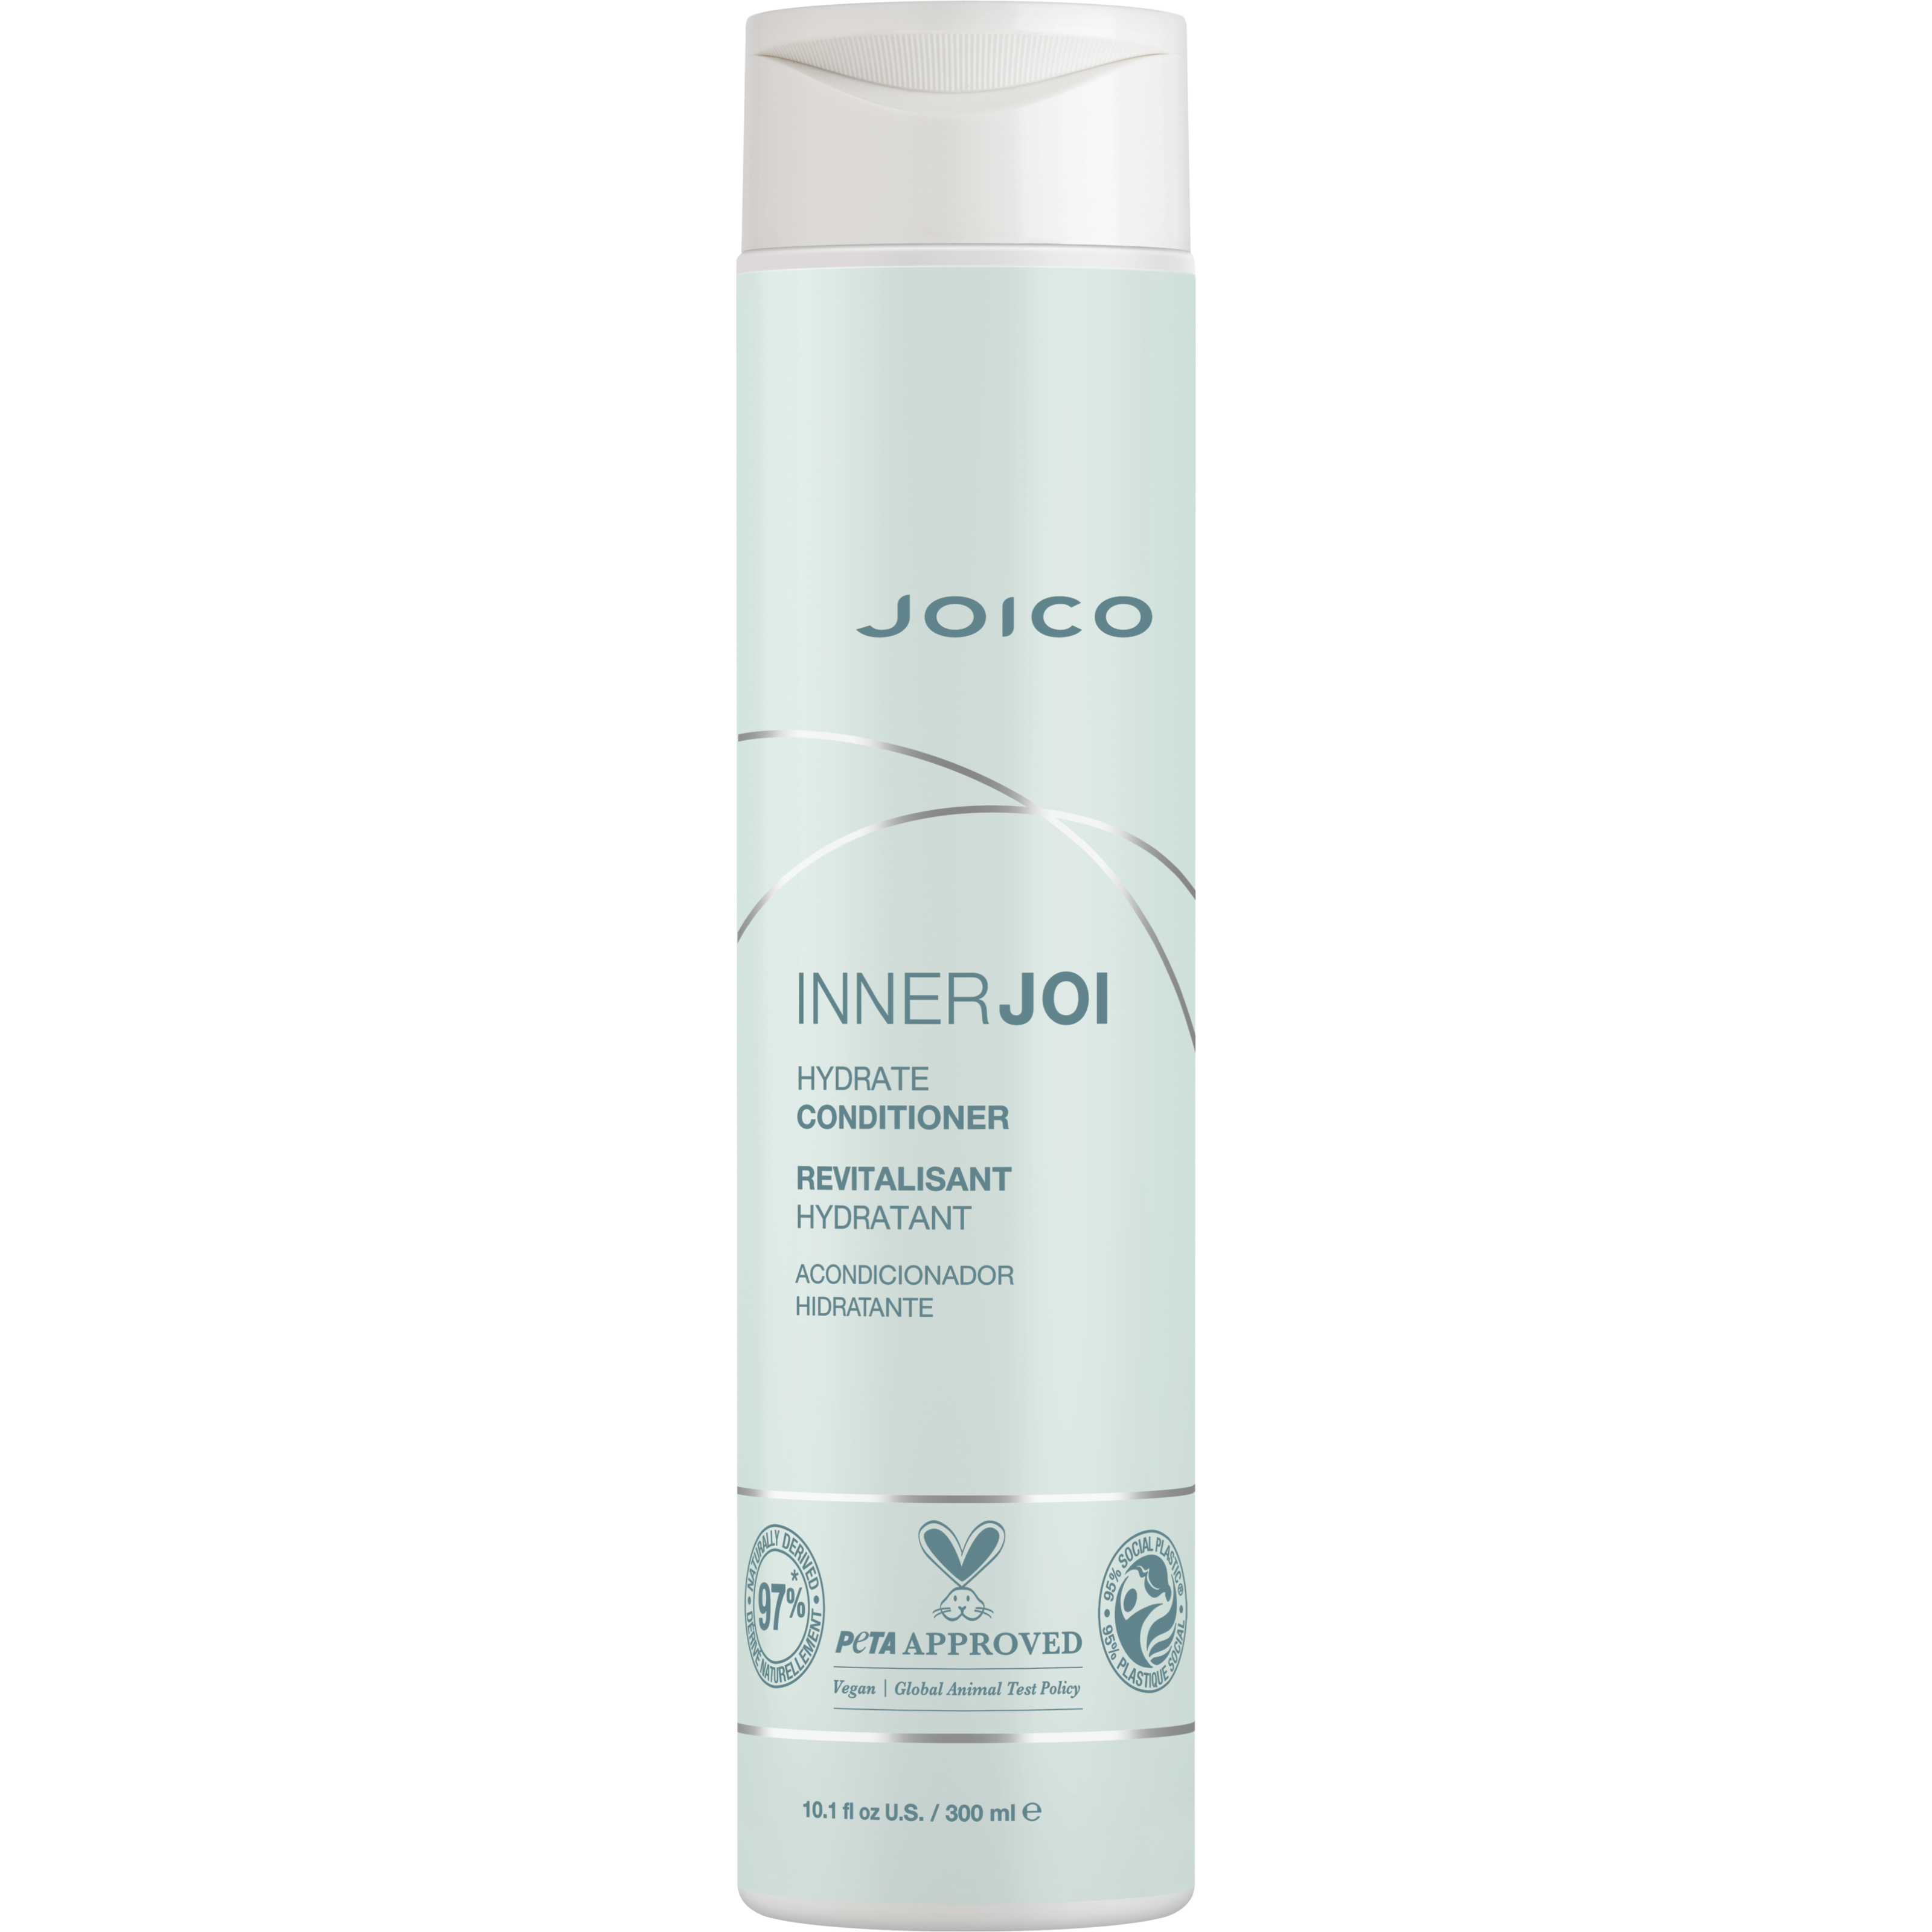 Joico INNERJOI Hydrate Conditioner 300 ml